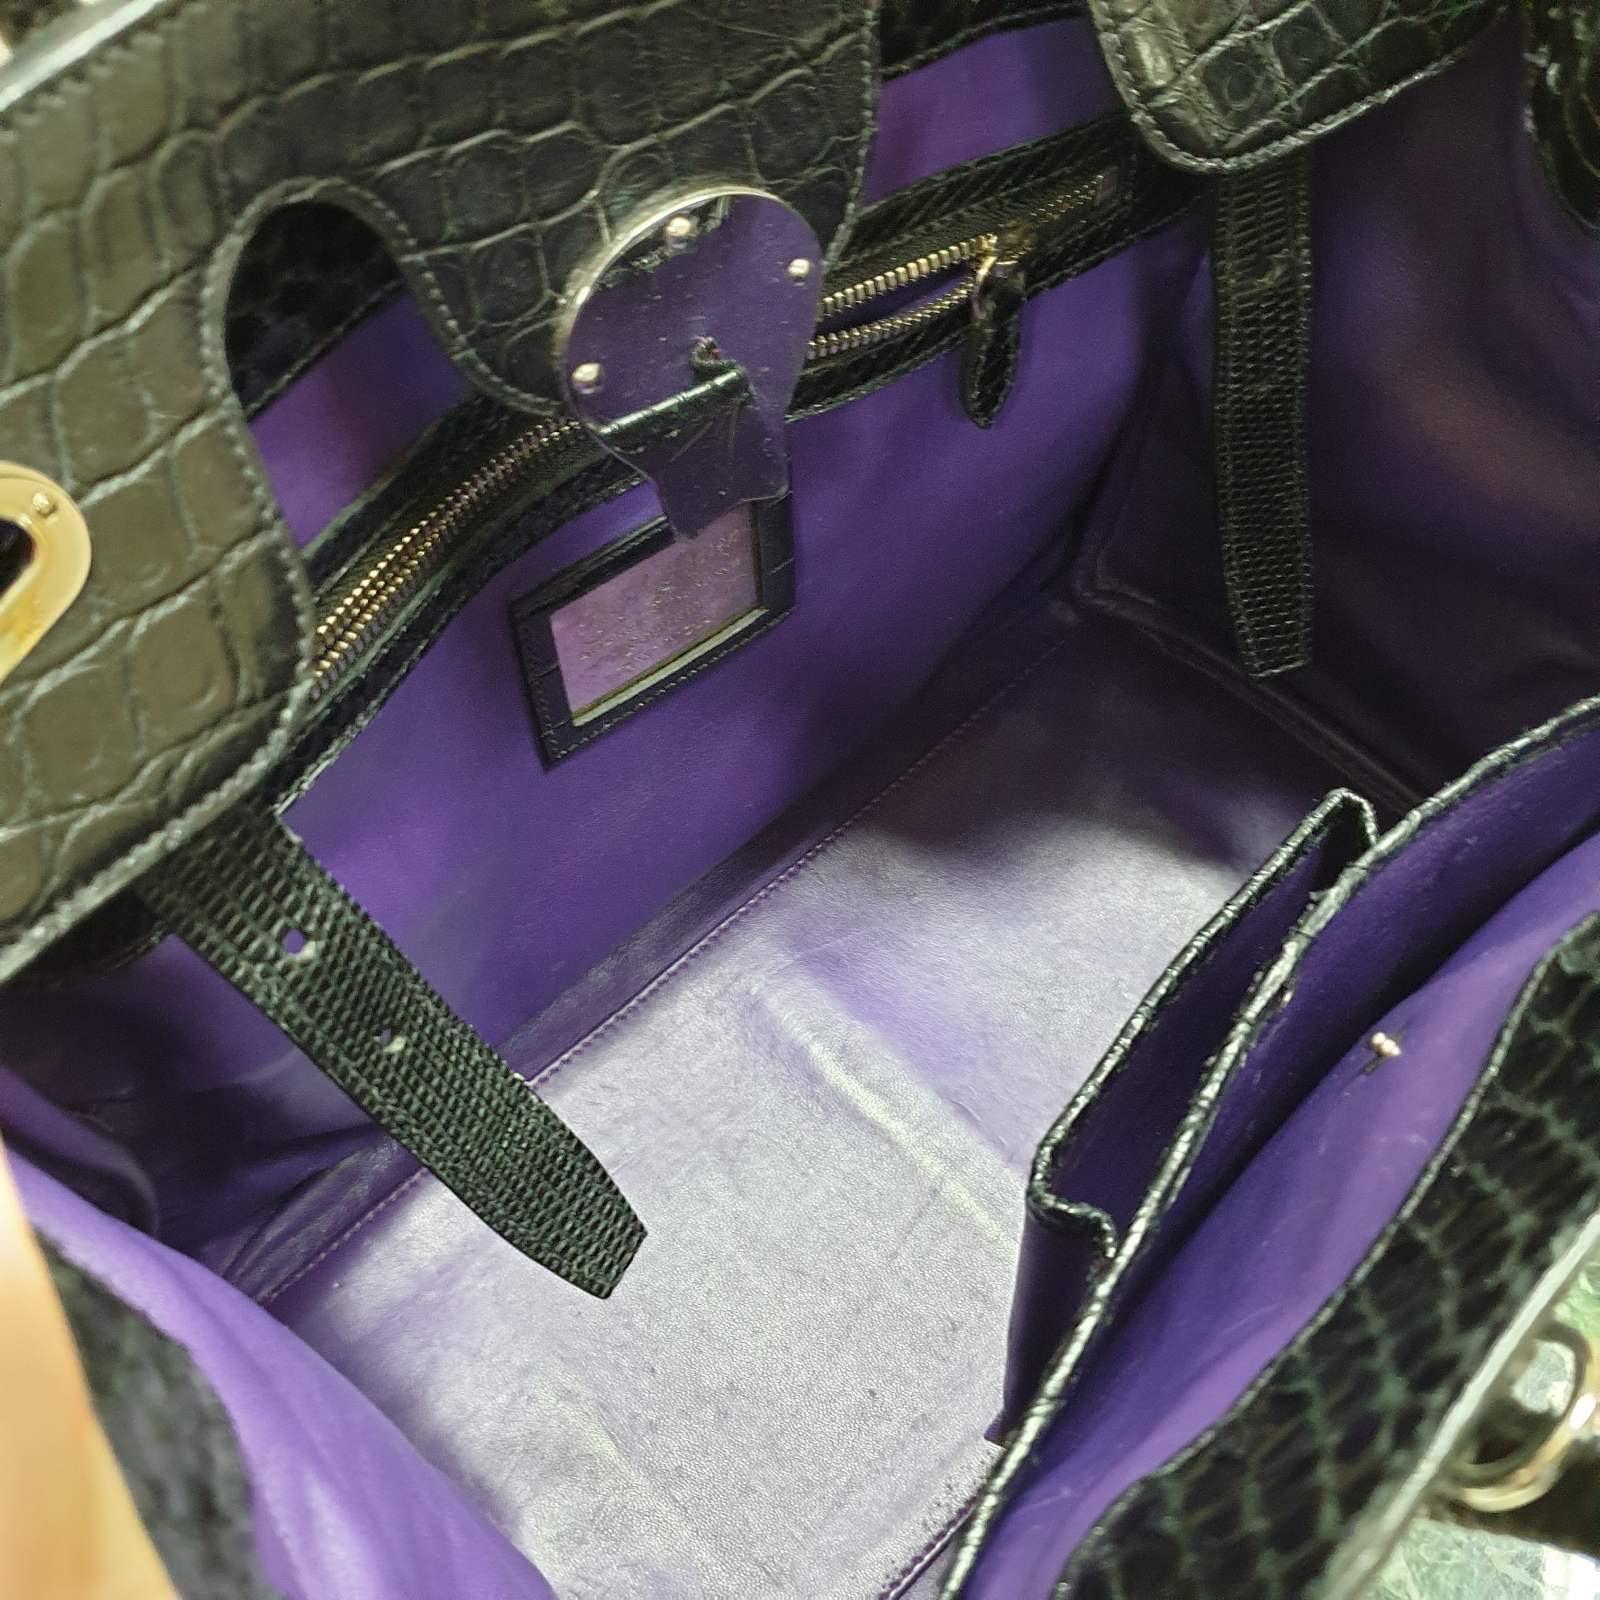 Ralph Lauren Crocodile Python Ricky 33 Tote Bag In Good Condition For Sale In Krakow, PL